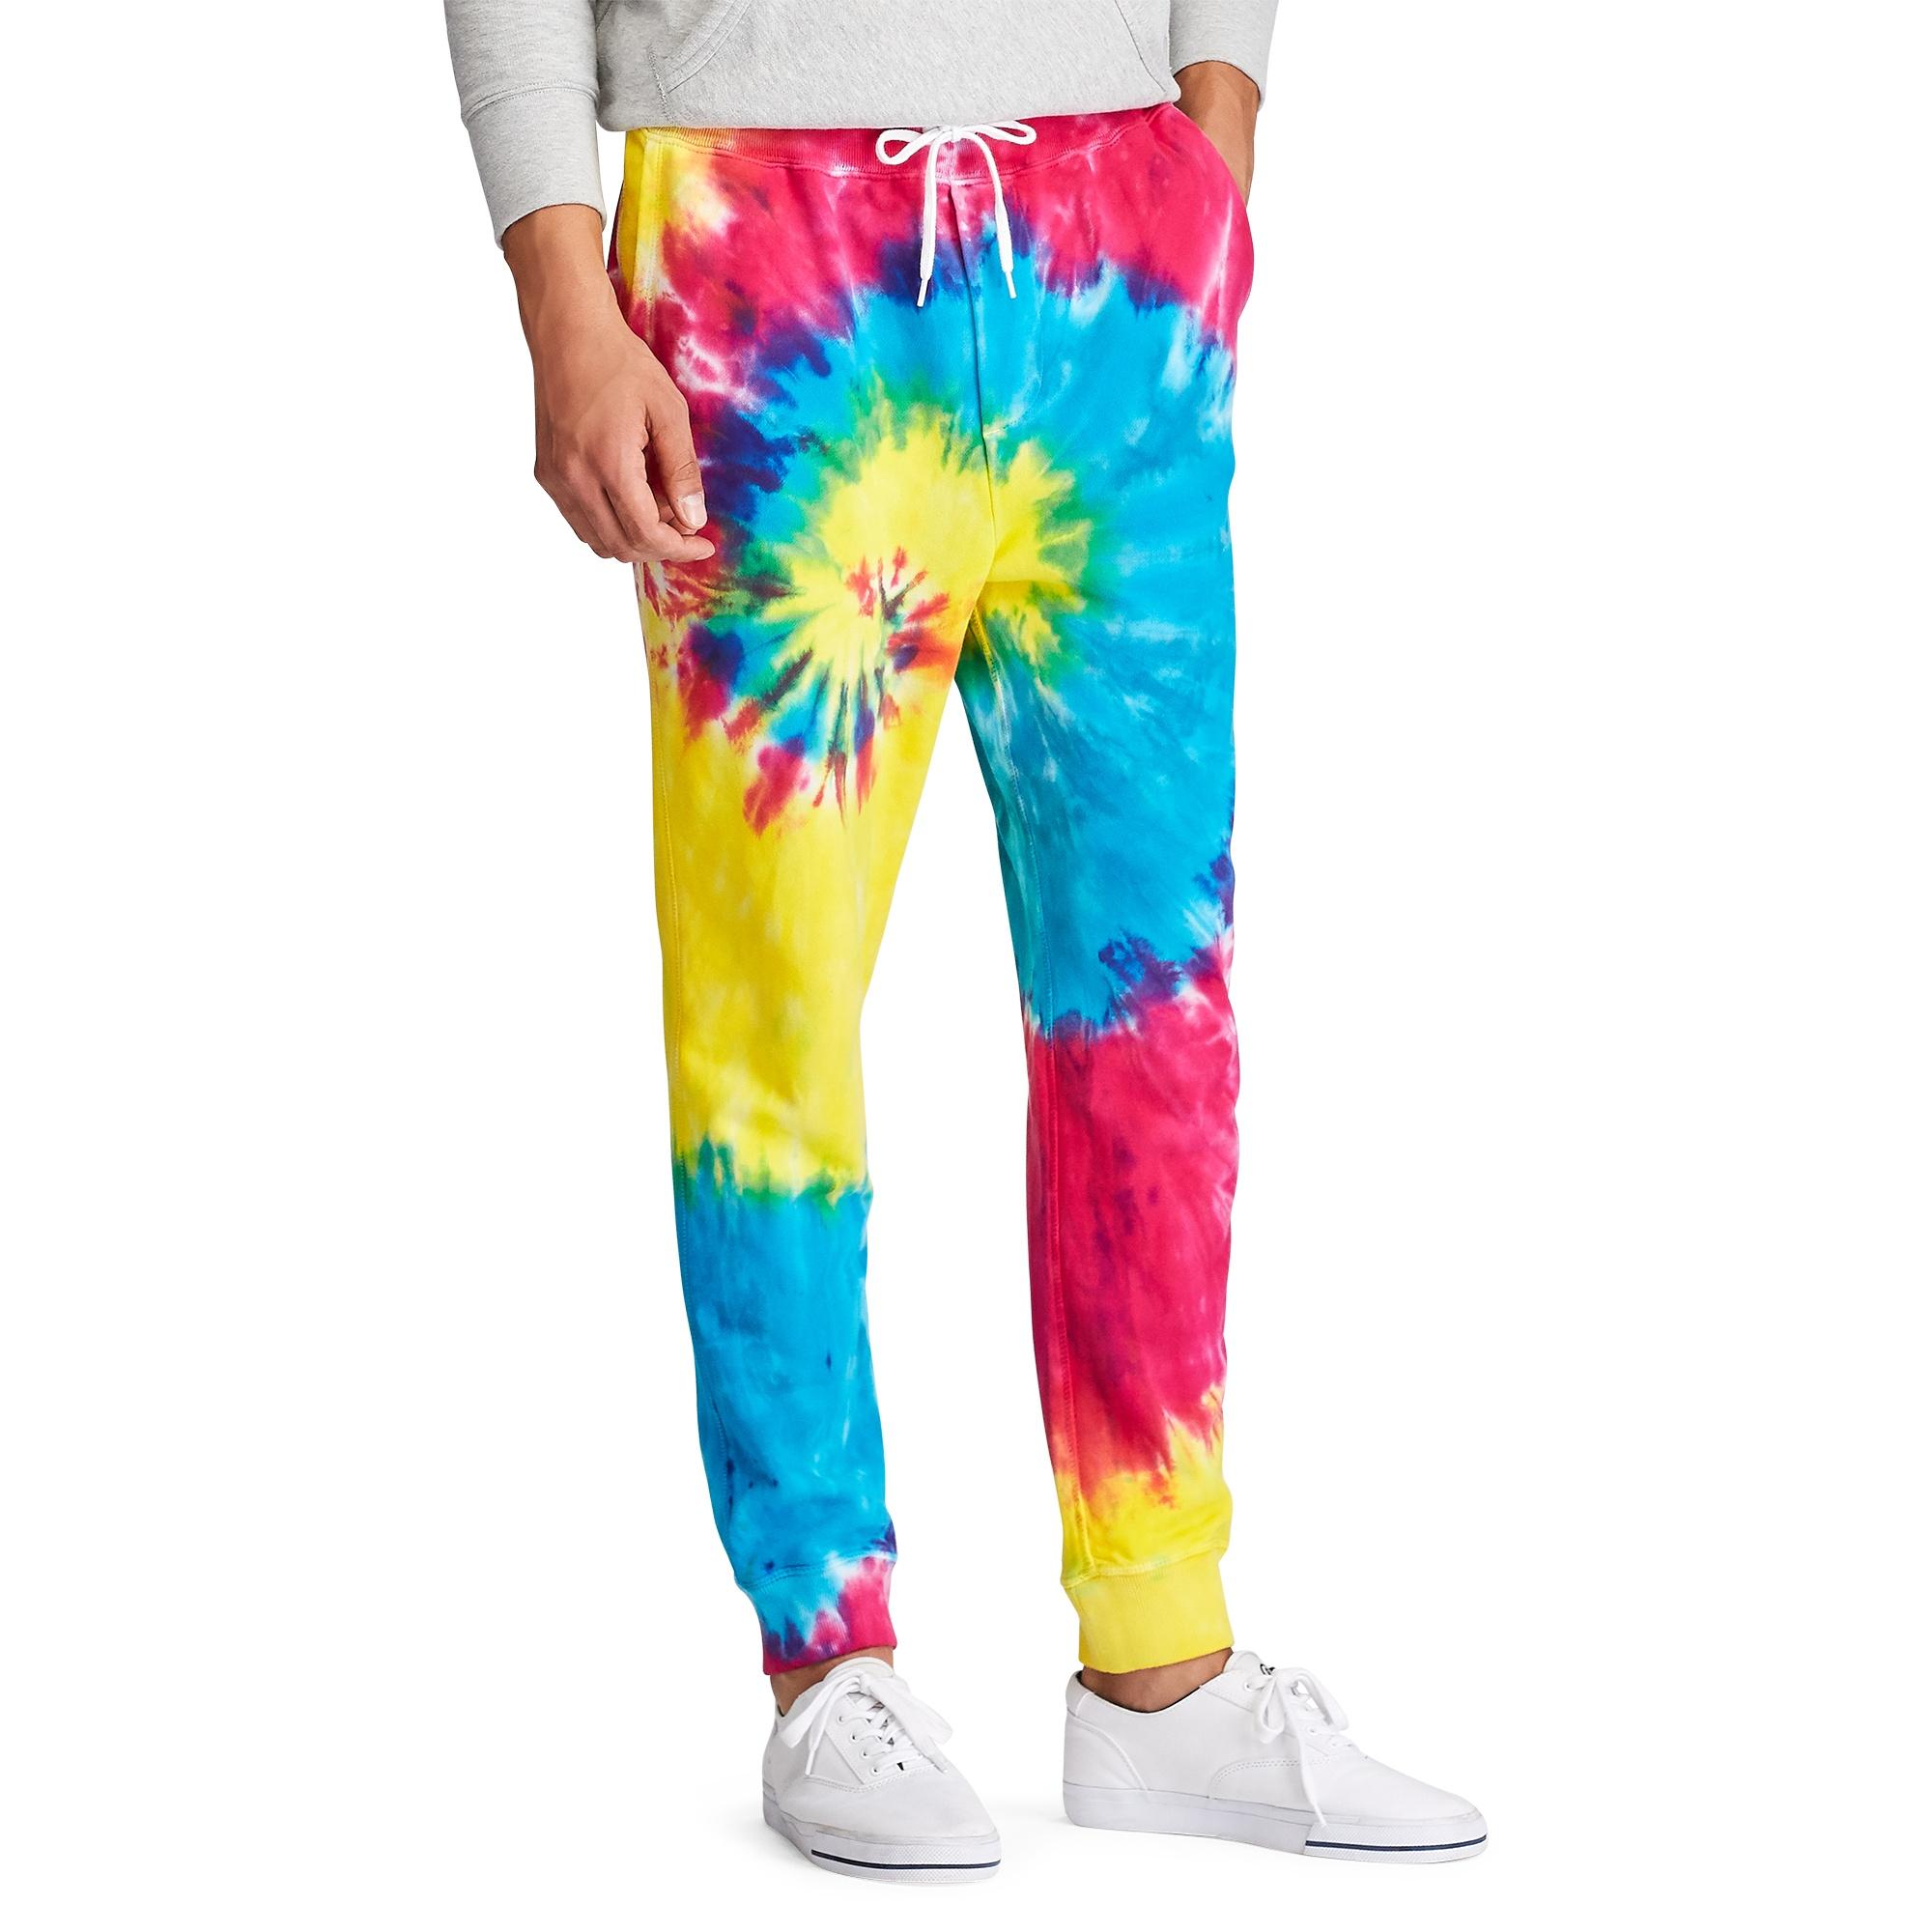 French - Terry Jogger Pants in Tie Dye 